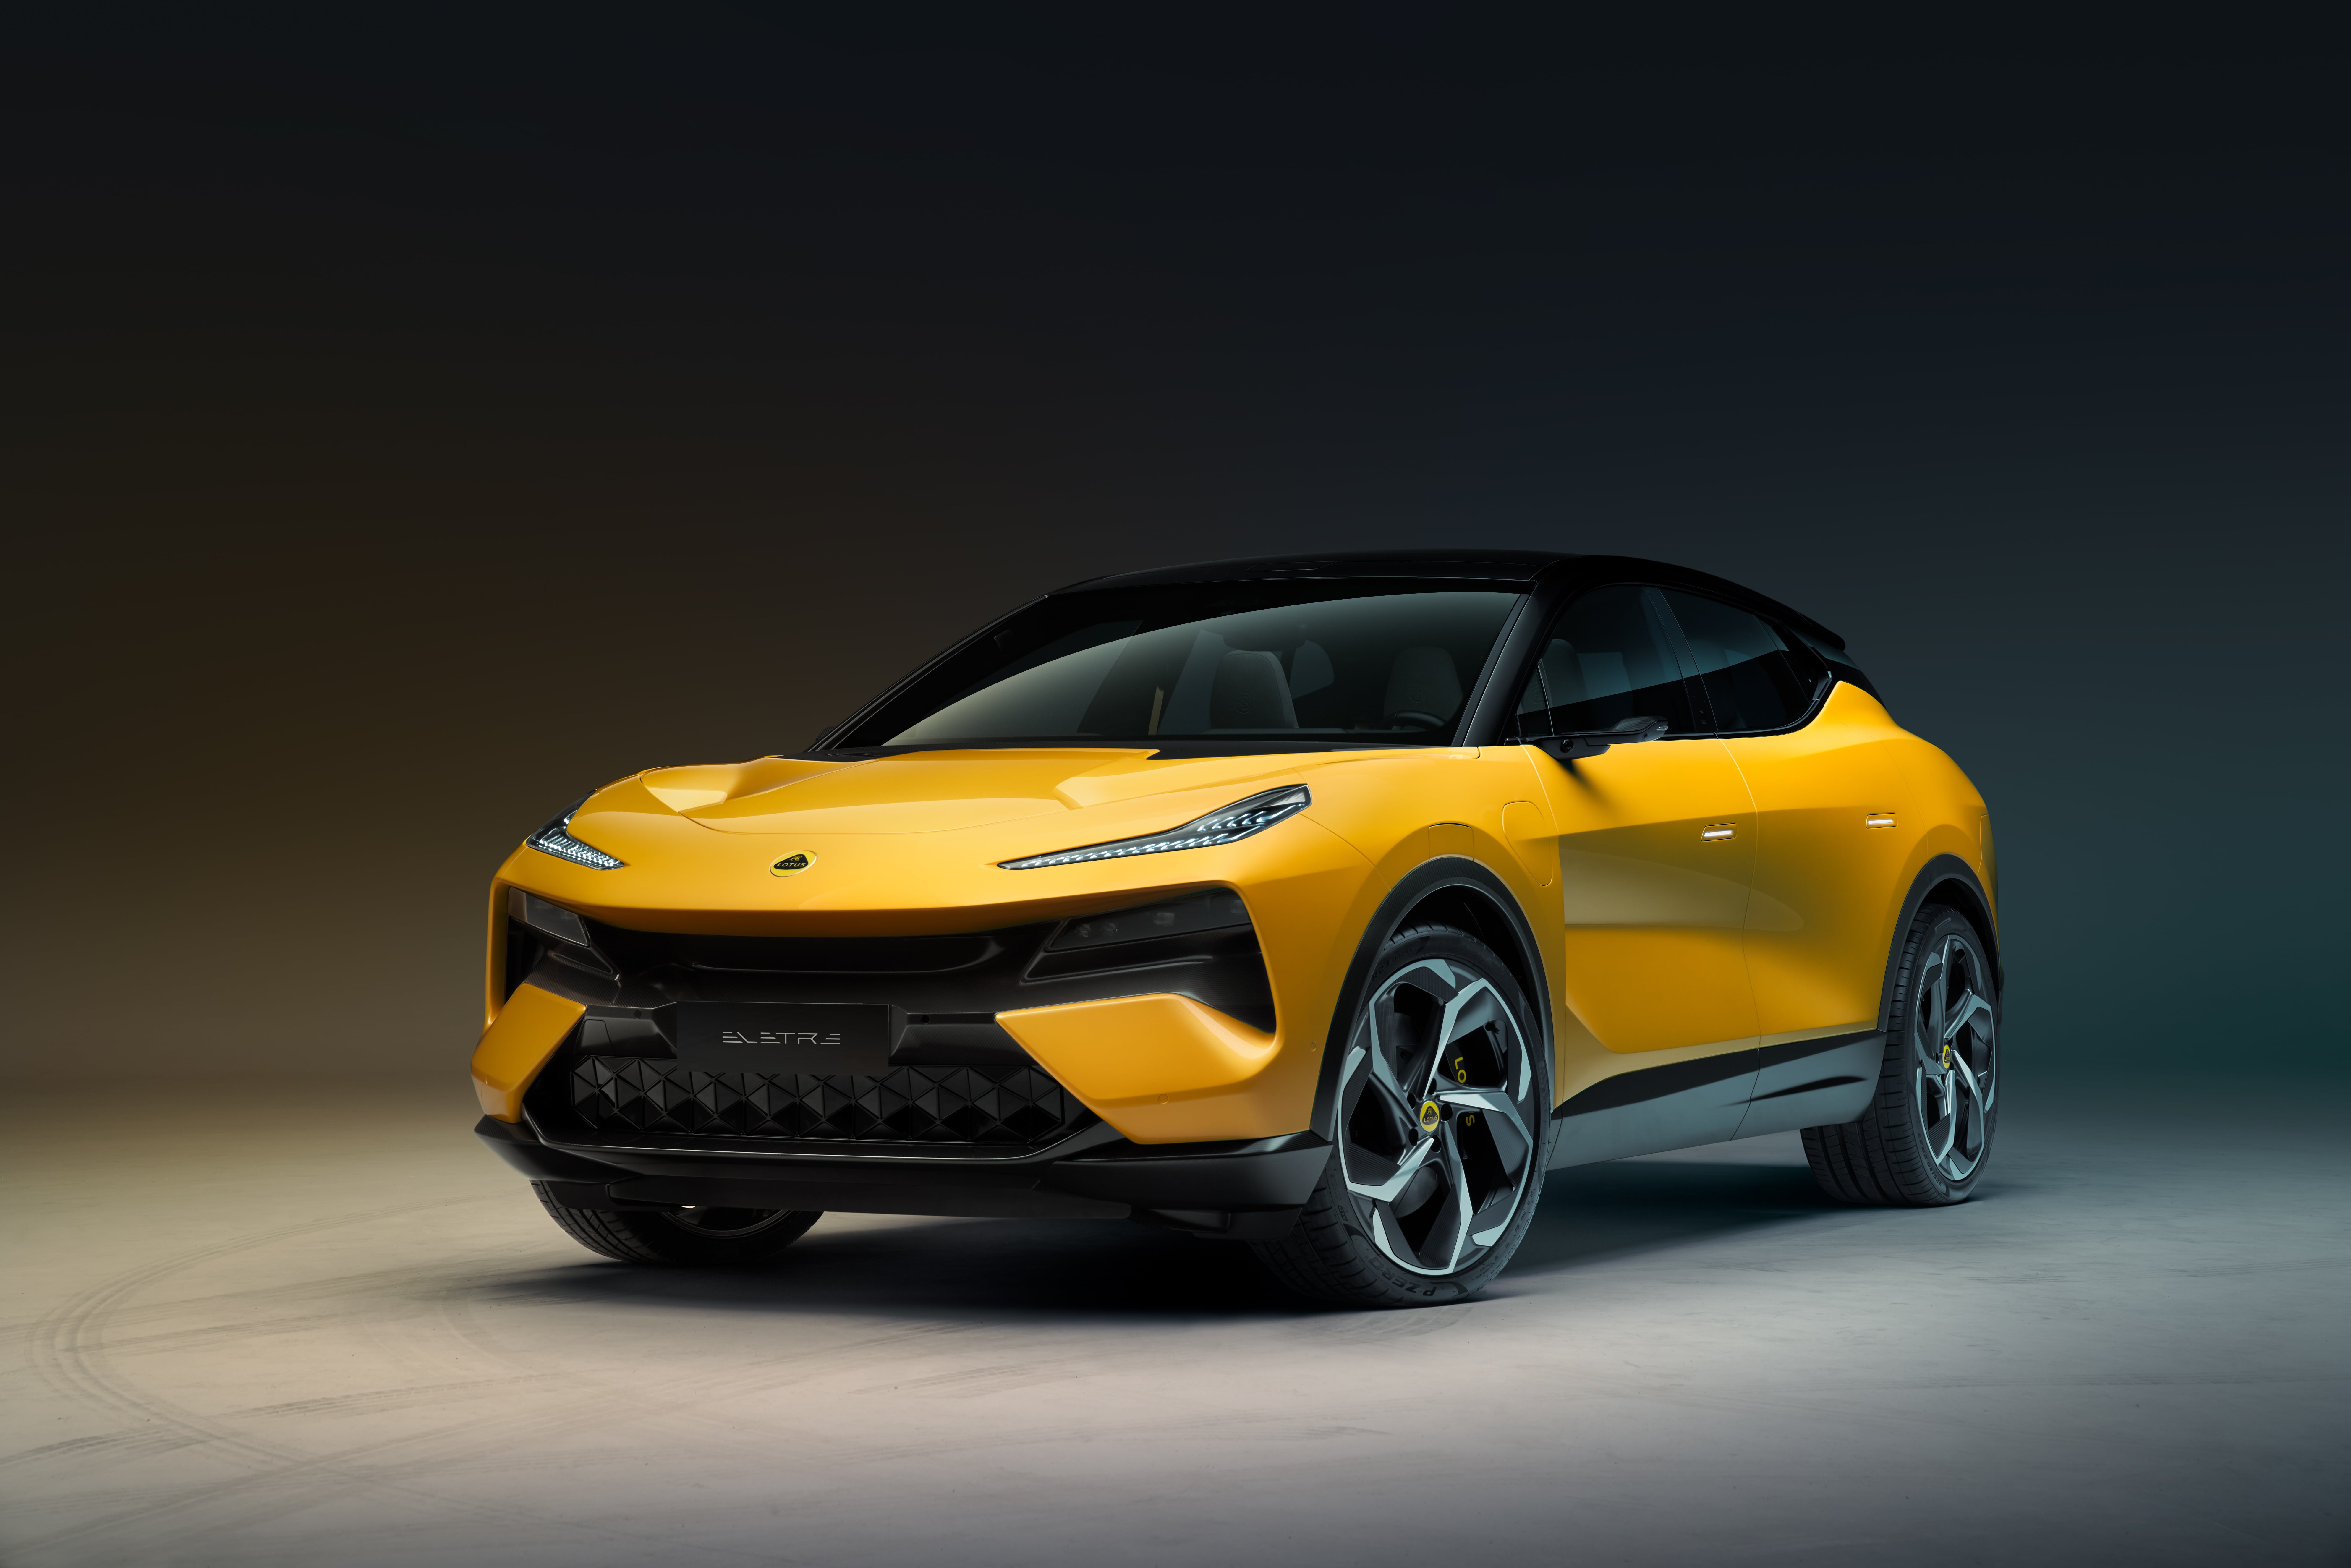 Worlds first All Electric Hyper-SUV